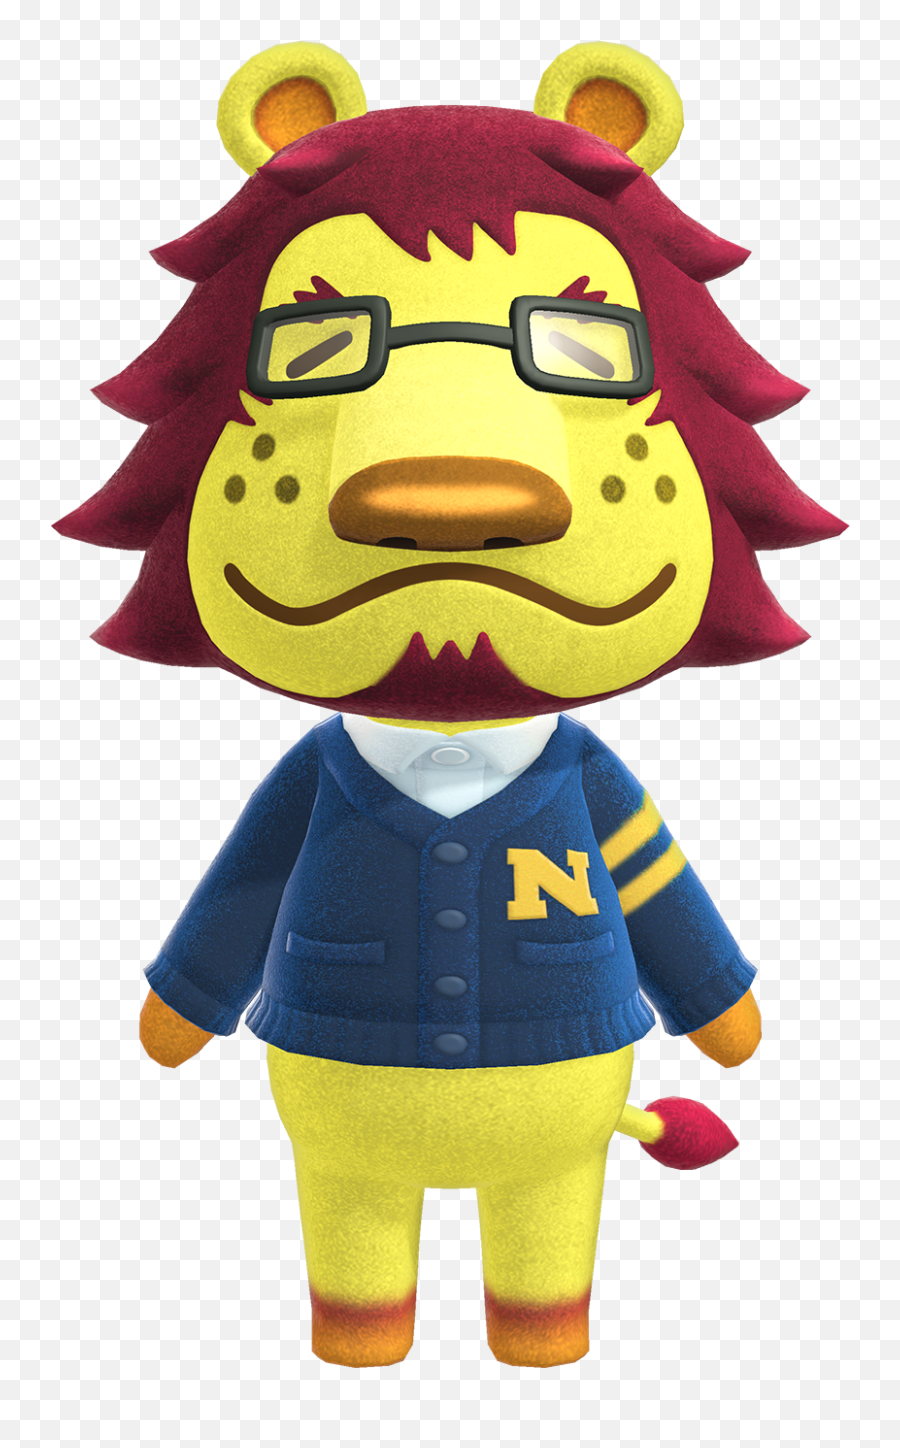 Mott - Lion Villagers Animal Crossing Emoji,What Does Thumbs Up Emoji Eith Colored Tile Mean